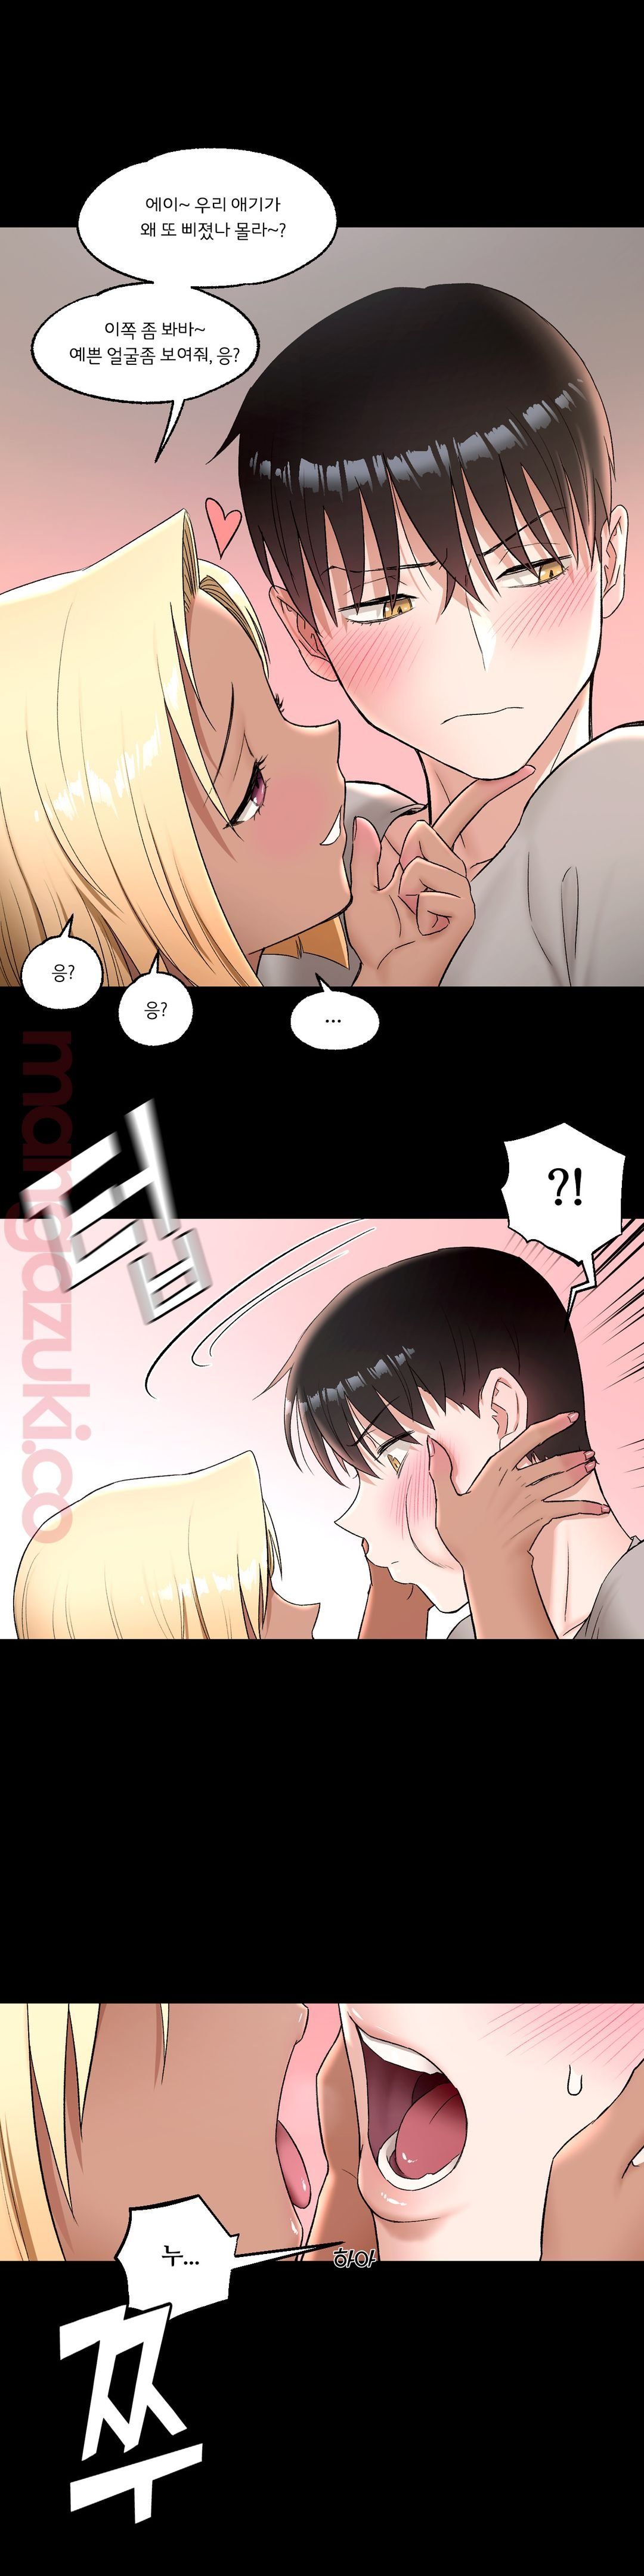 Sexercise Raw - Chapter 42 Page 23